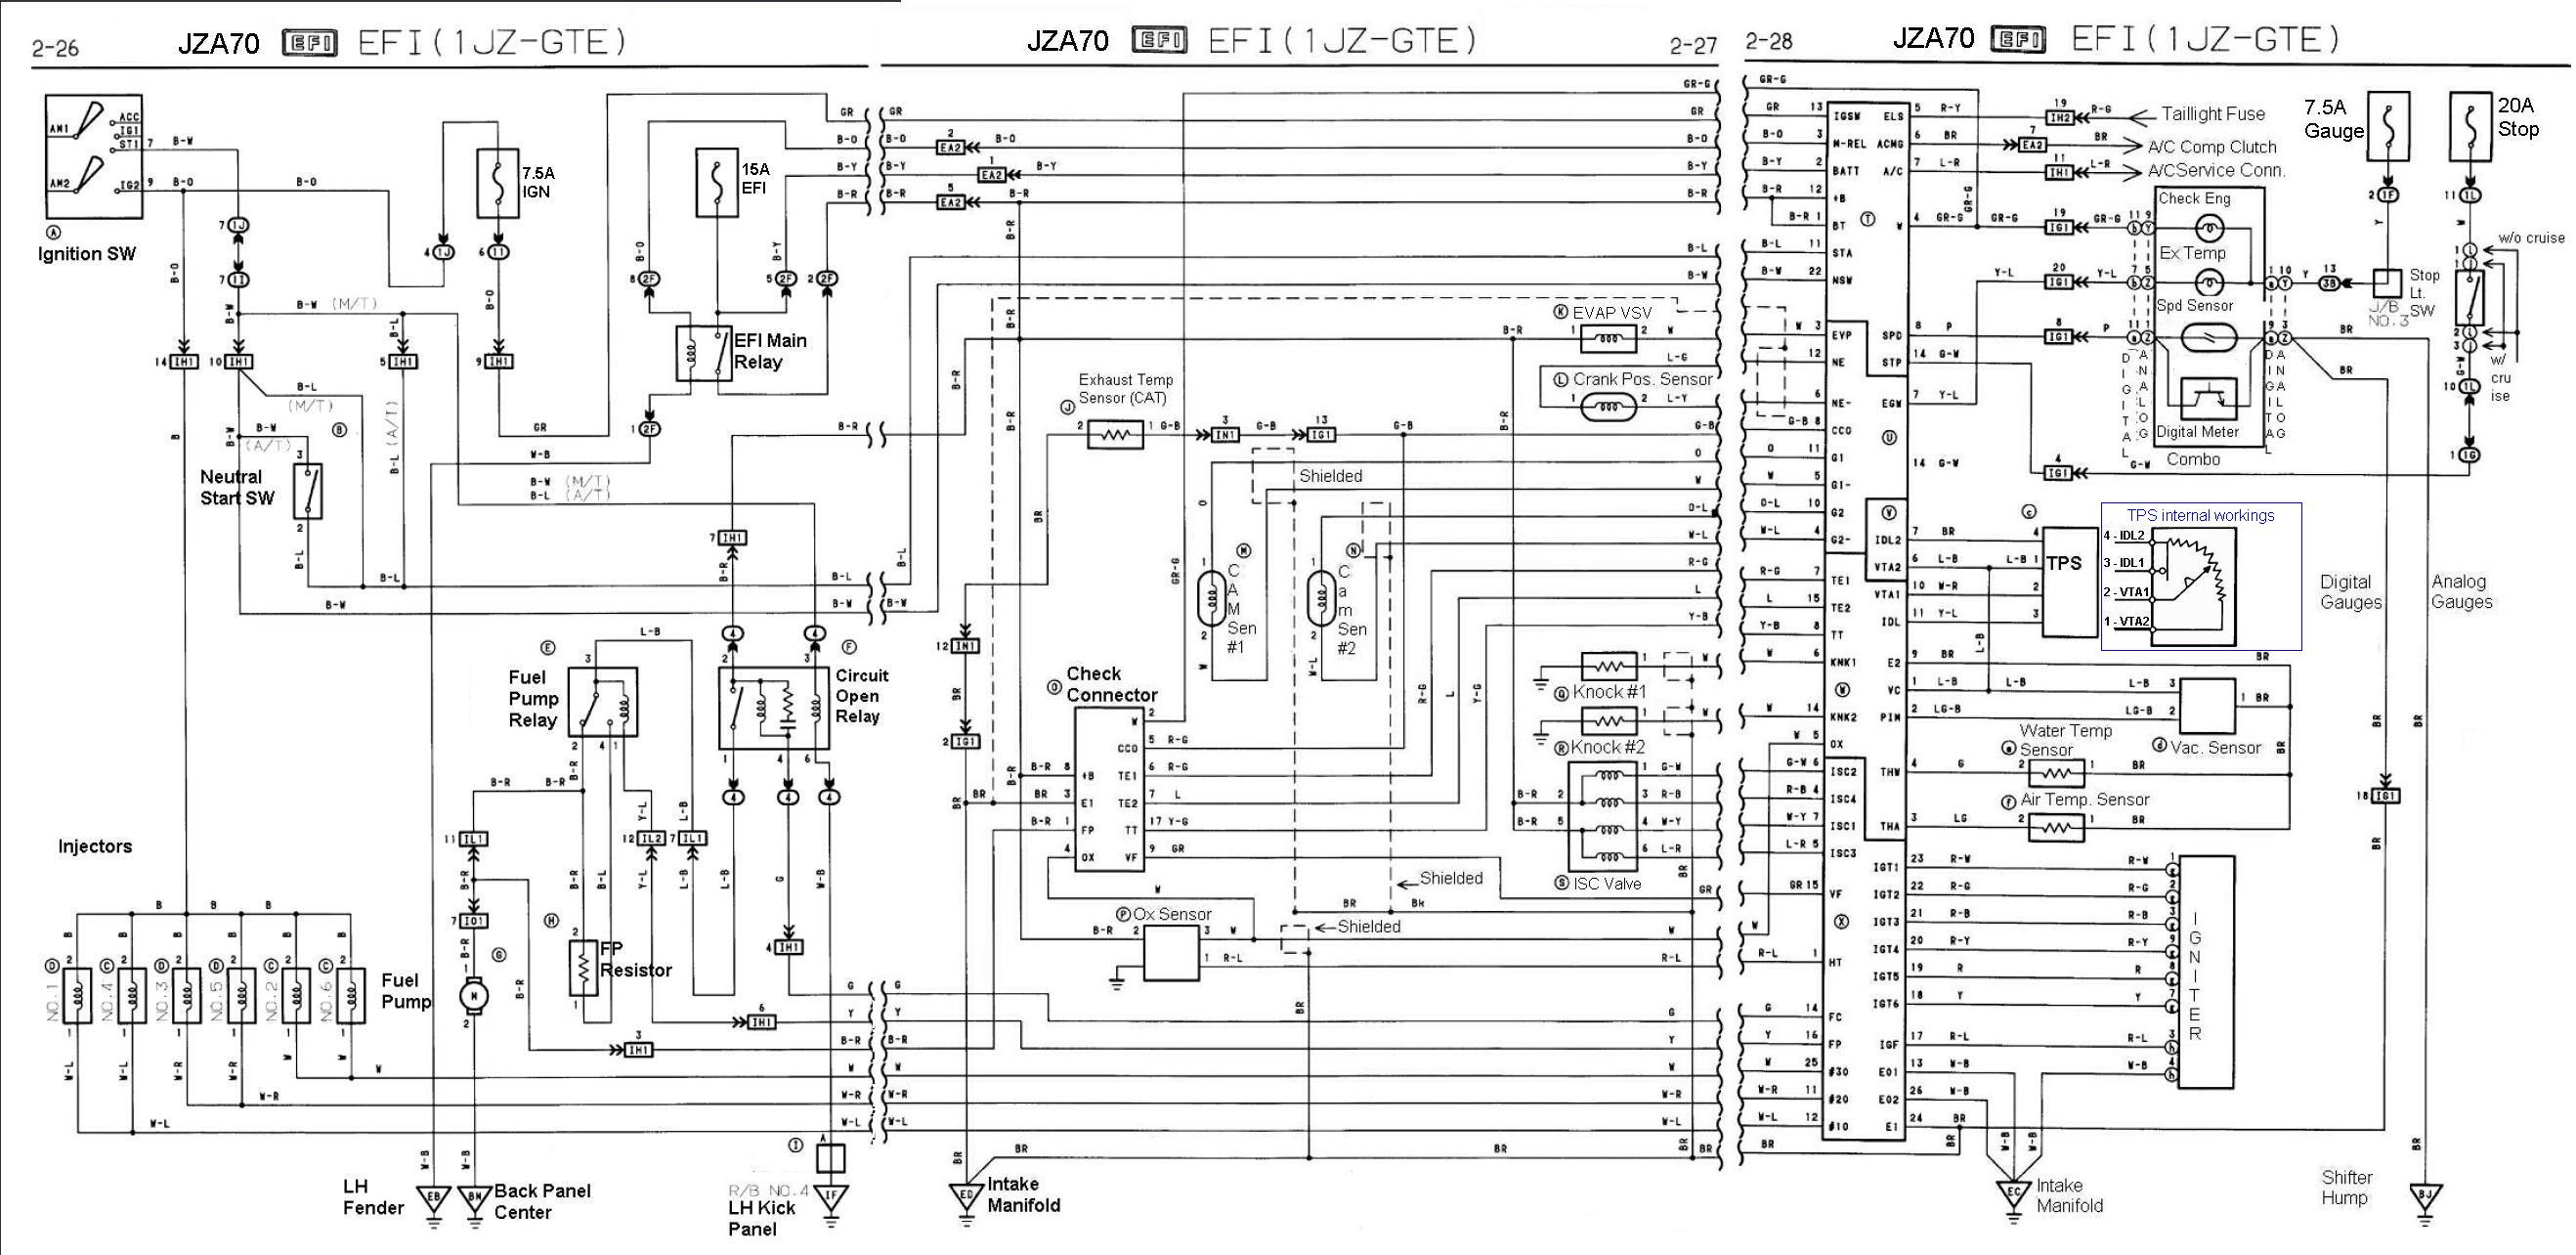 1JZ-GTE JZA70 Wiring diagrams - Perfect Tuning  1jz Distributor Ecu Wiring Diagram Pdf    Perfect Tuning